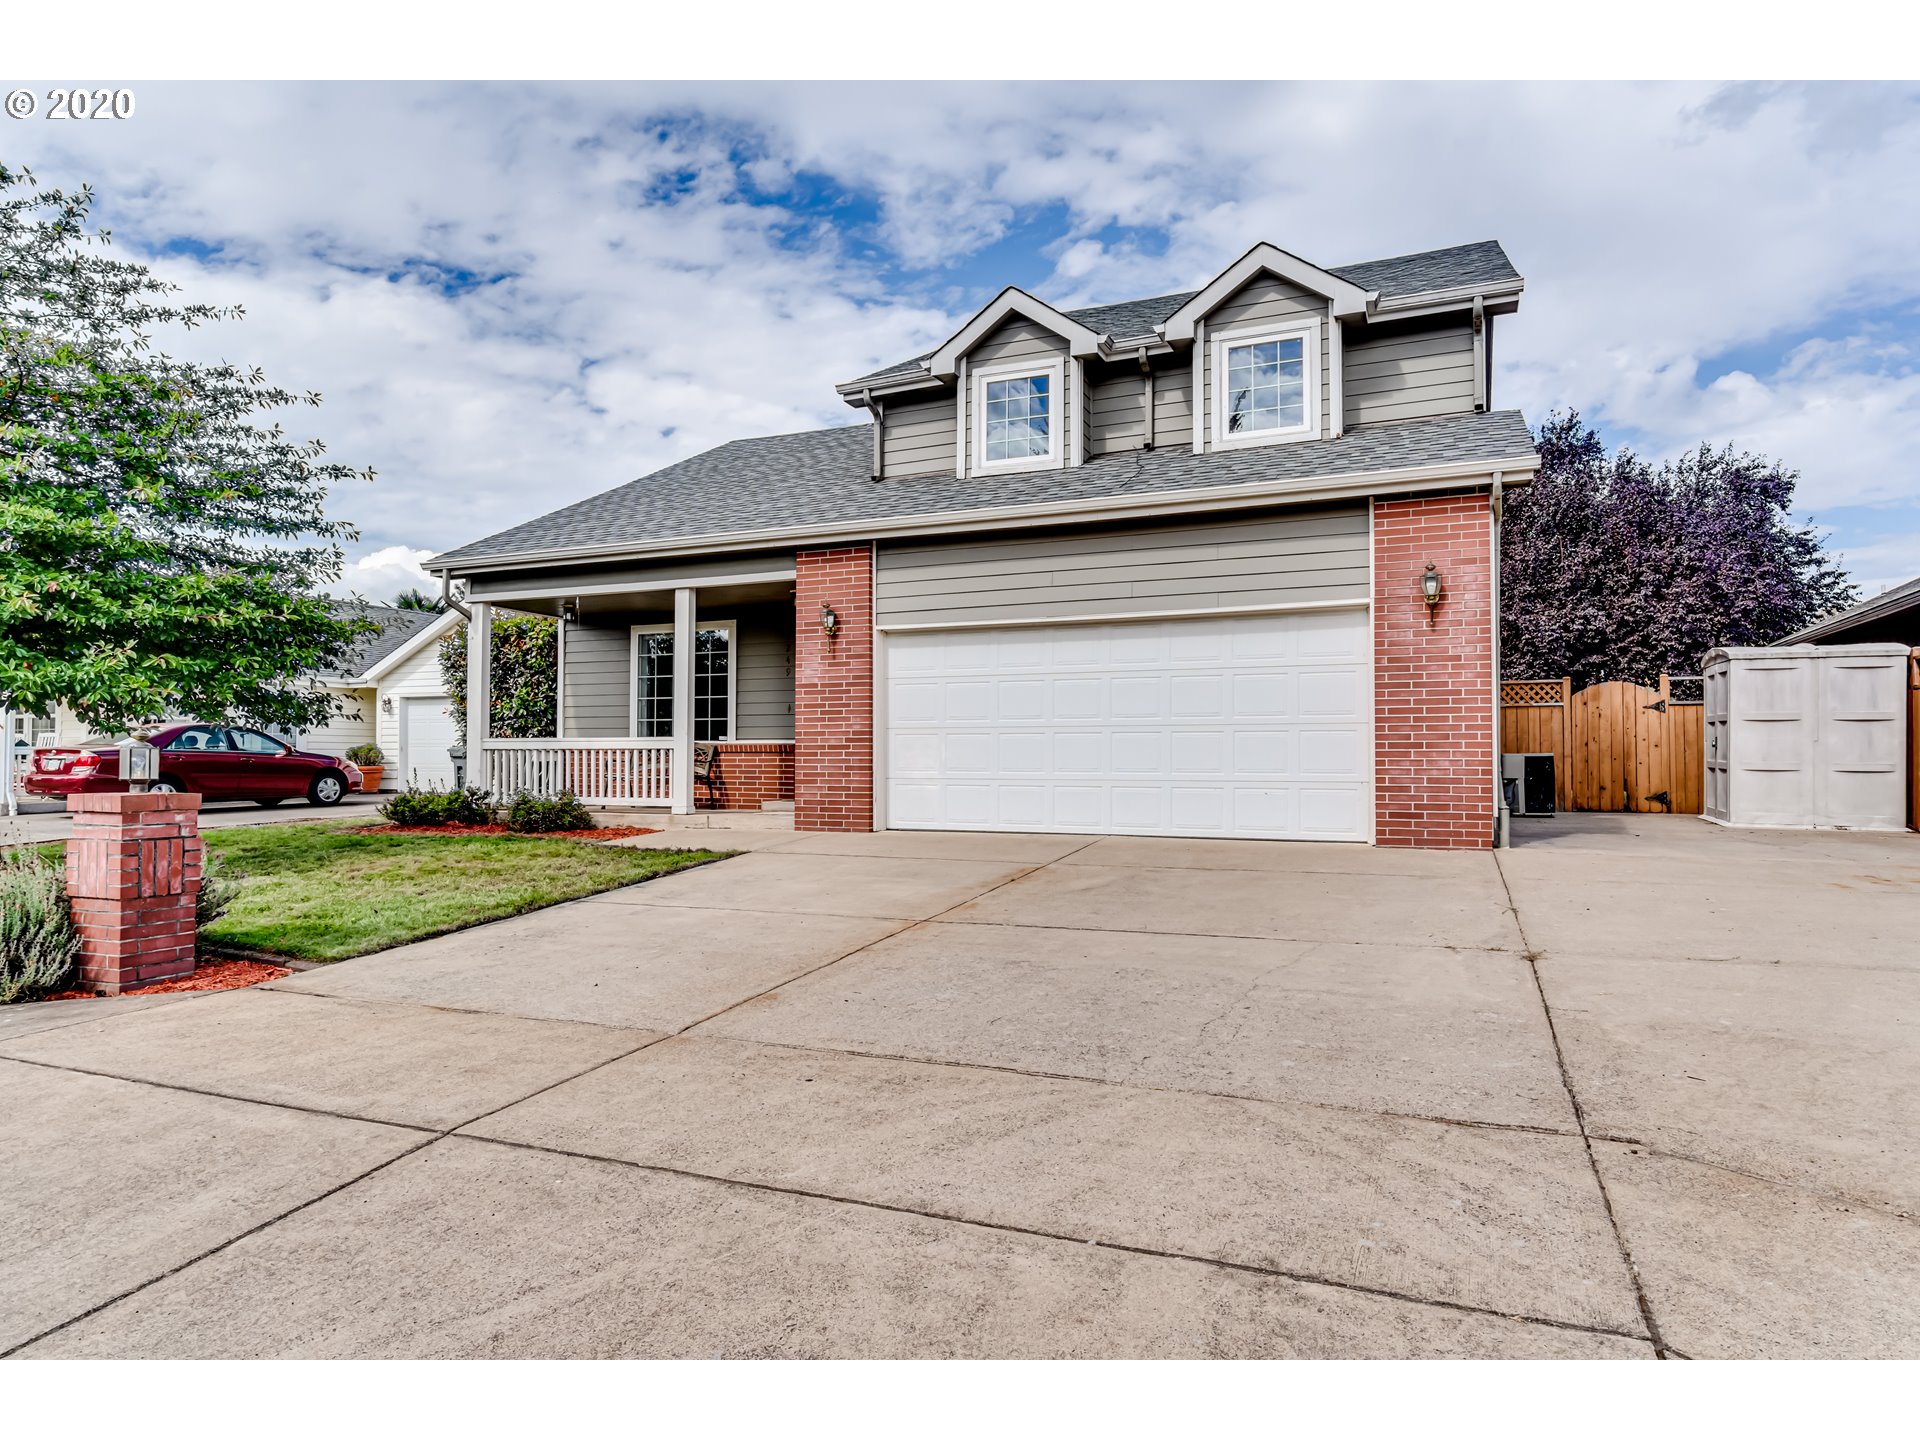 1249 STONE CREEK DR (1 of 32)